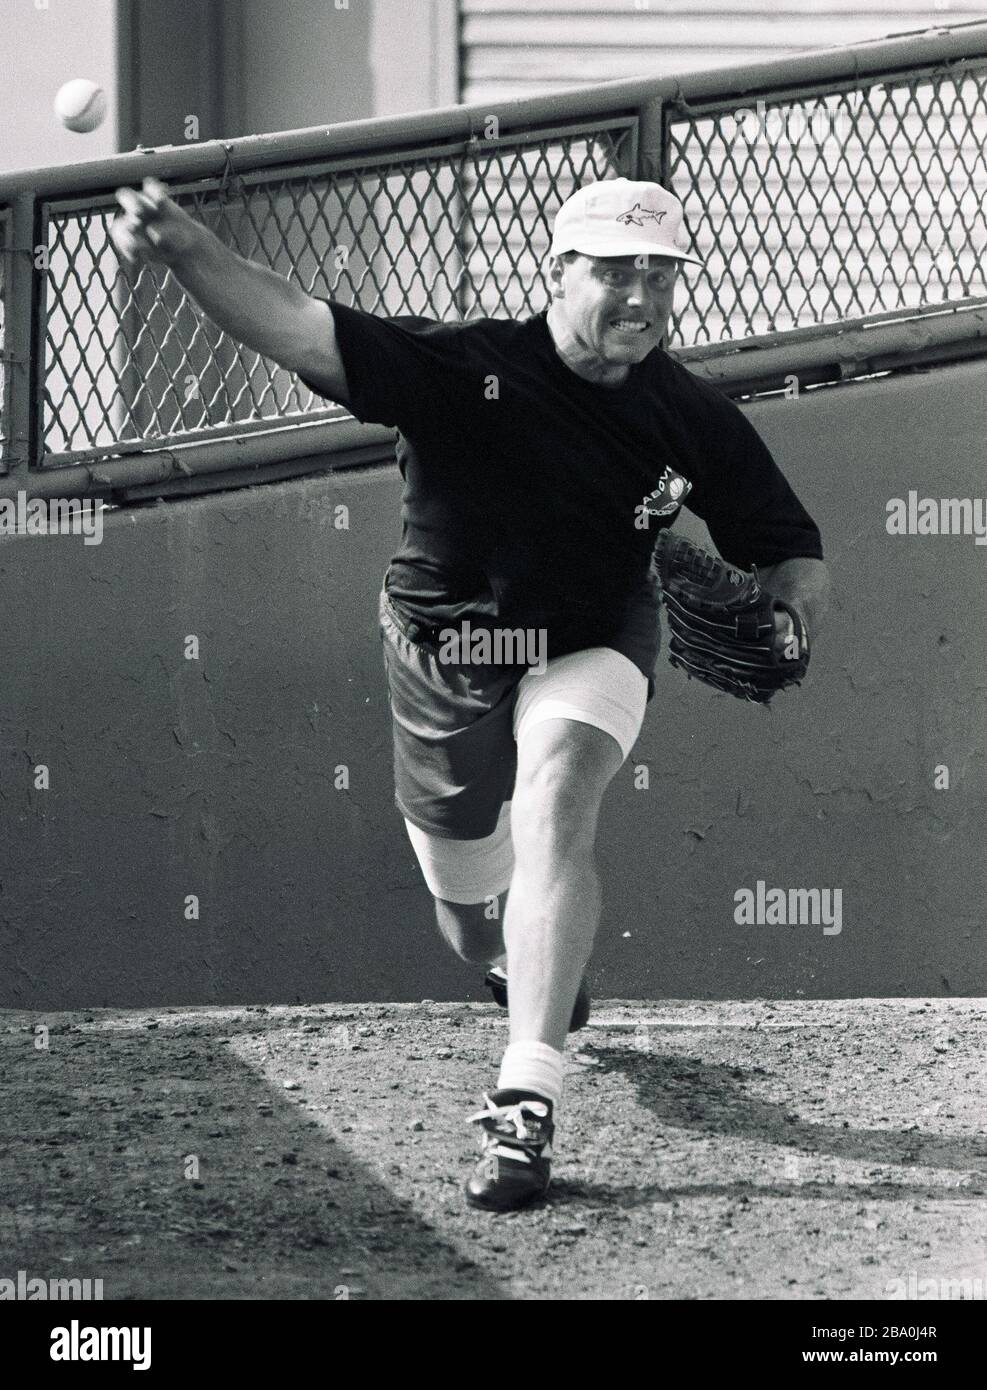 Red Sox pitcher Roger Clemens pracrices his pitching skills in the Red Sox bull pen during a day off at Fenway Park in Boston Ma USA exculsive photo by Bill Bellknap 1990’s Stock Photo